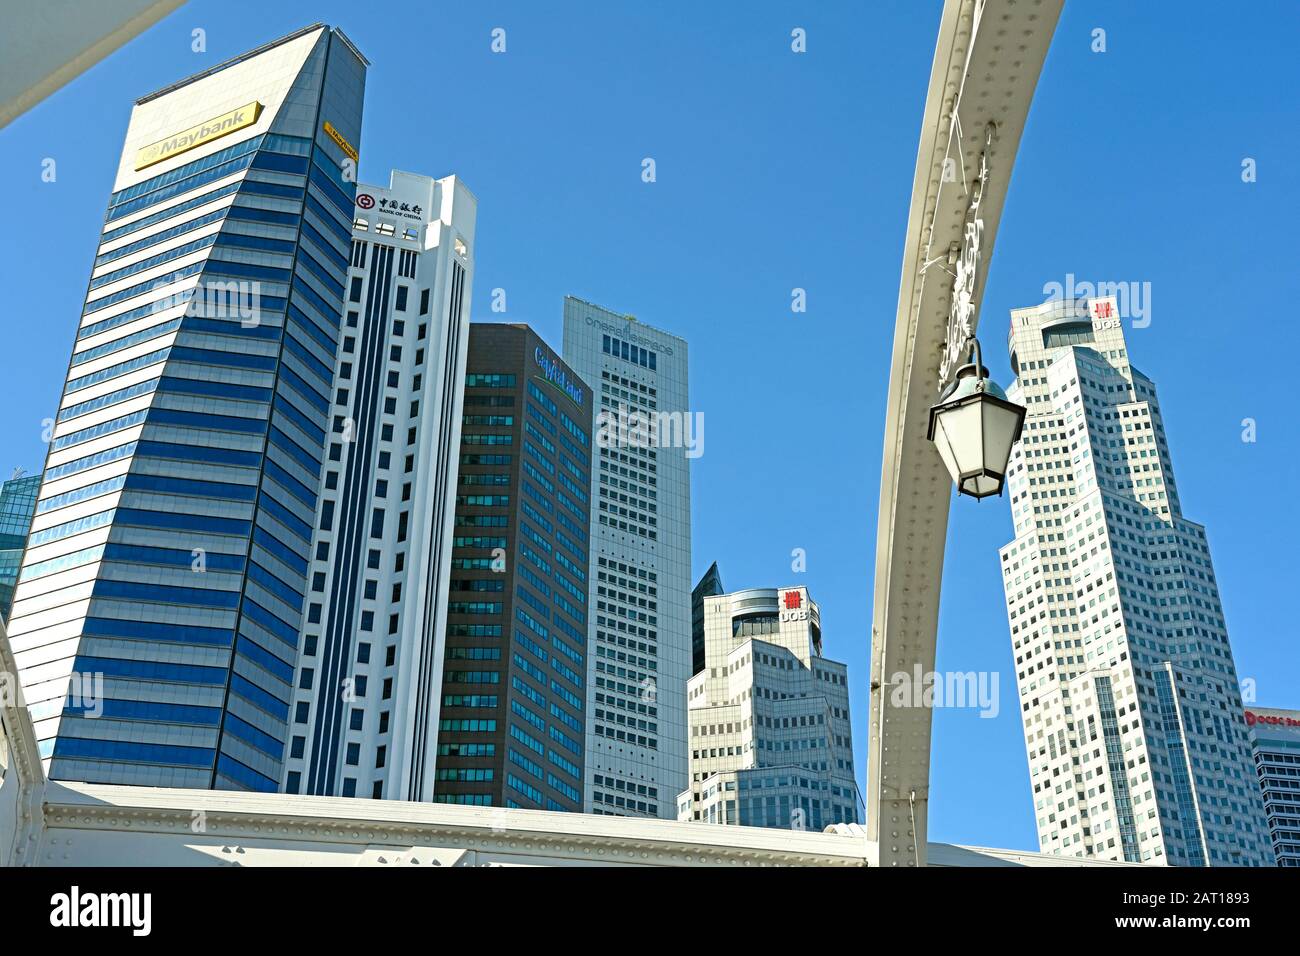 singapore, singapore - 2020.01.25: view through structures of anderson bridge onto high rise office buildings of central business district (cbd) Stock Photo